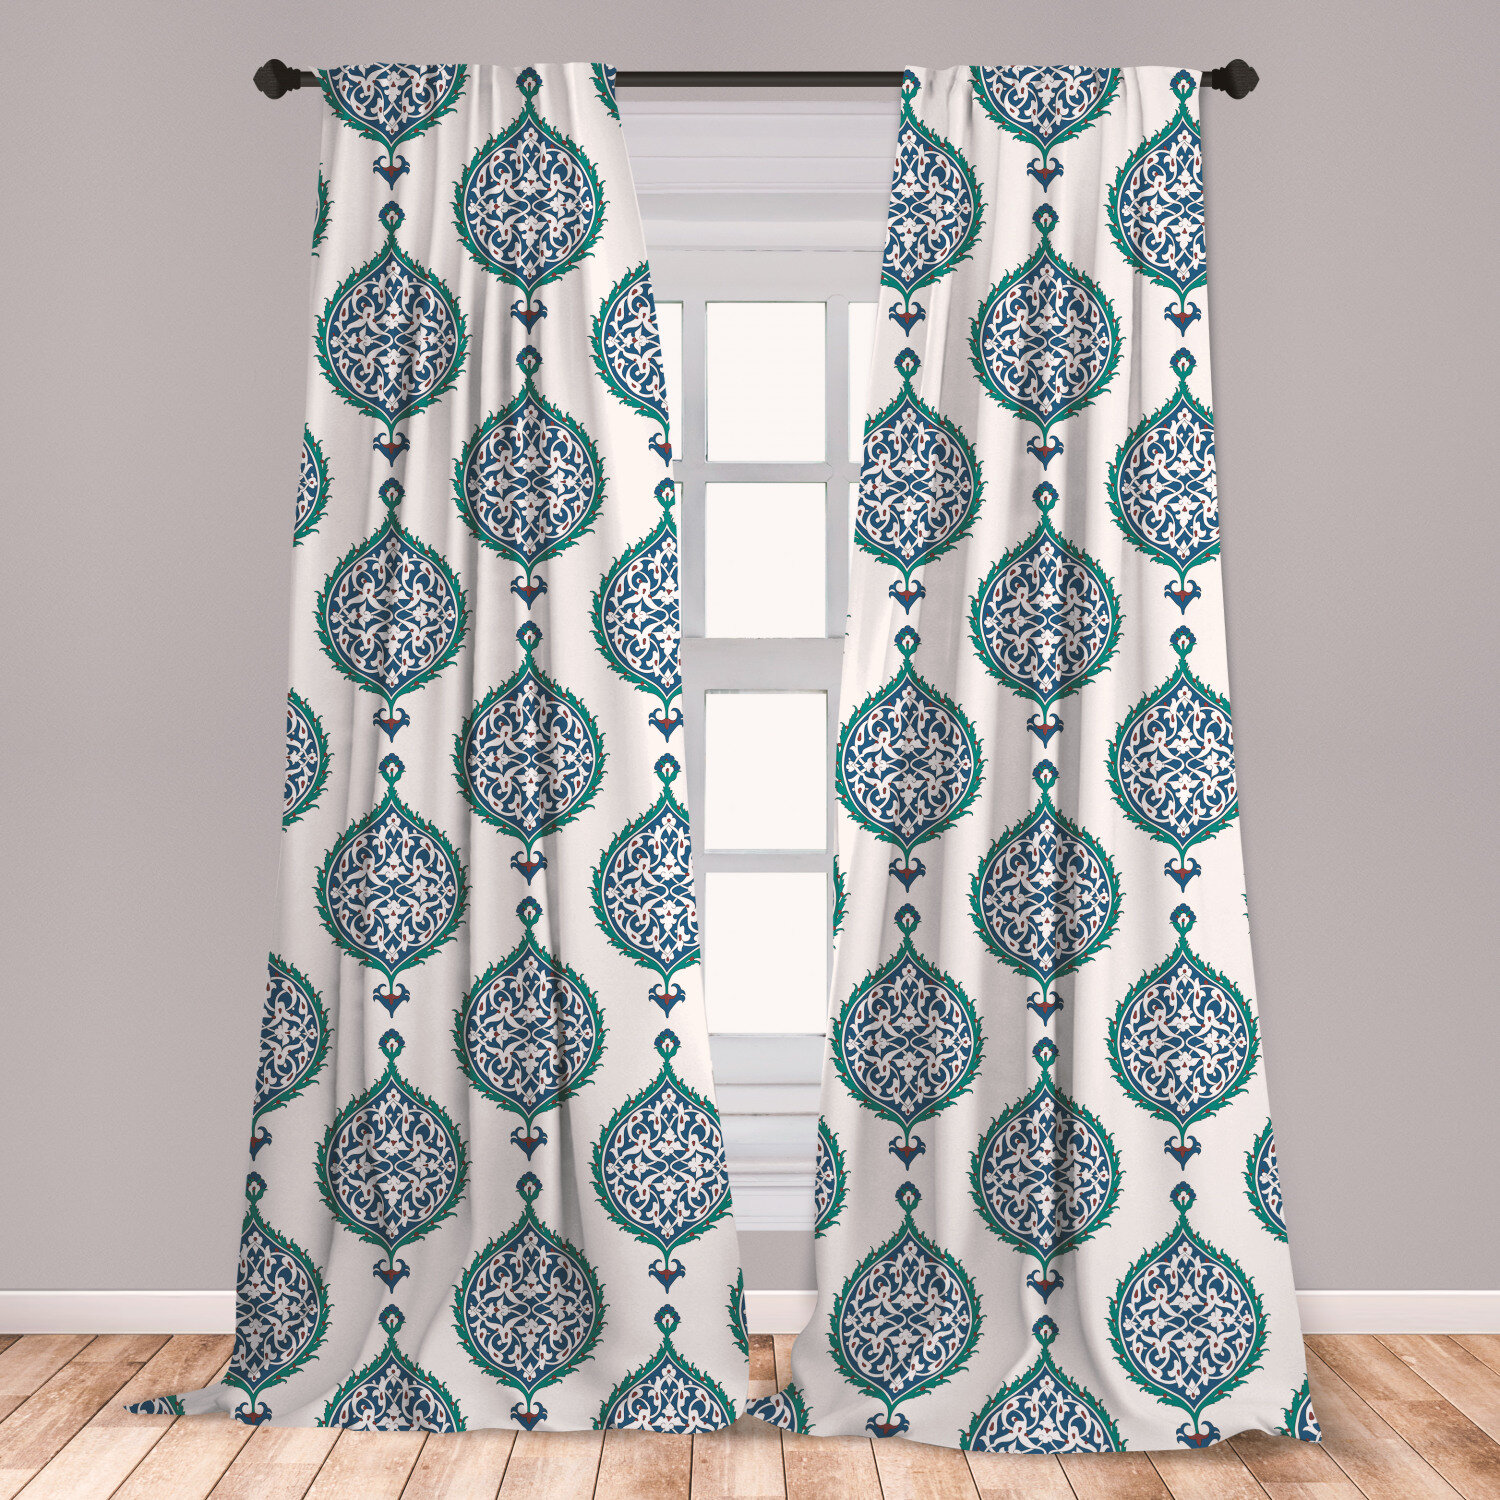 East Urban Home Ambesonne Turkish Pattern Curtains Leaves In Symmetrical Order Cultures Of The East Theme Window Treatments 2 Panel Set For Living Room Bedroom Decor 56 X 63 Multicolor Wayfair